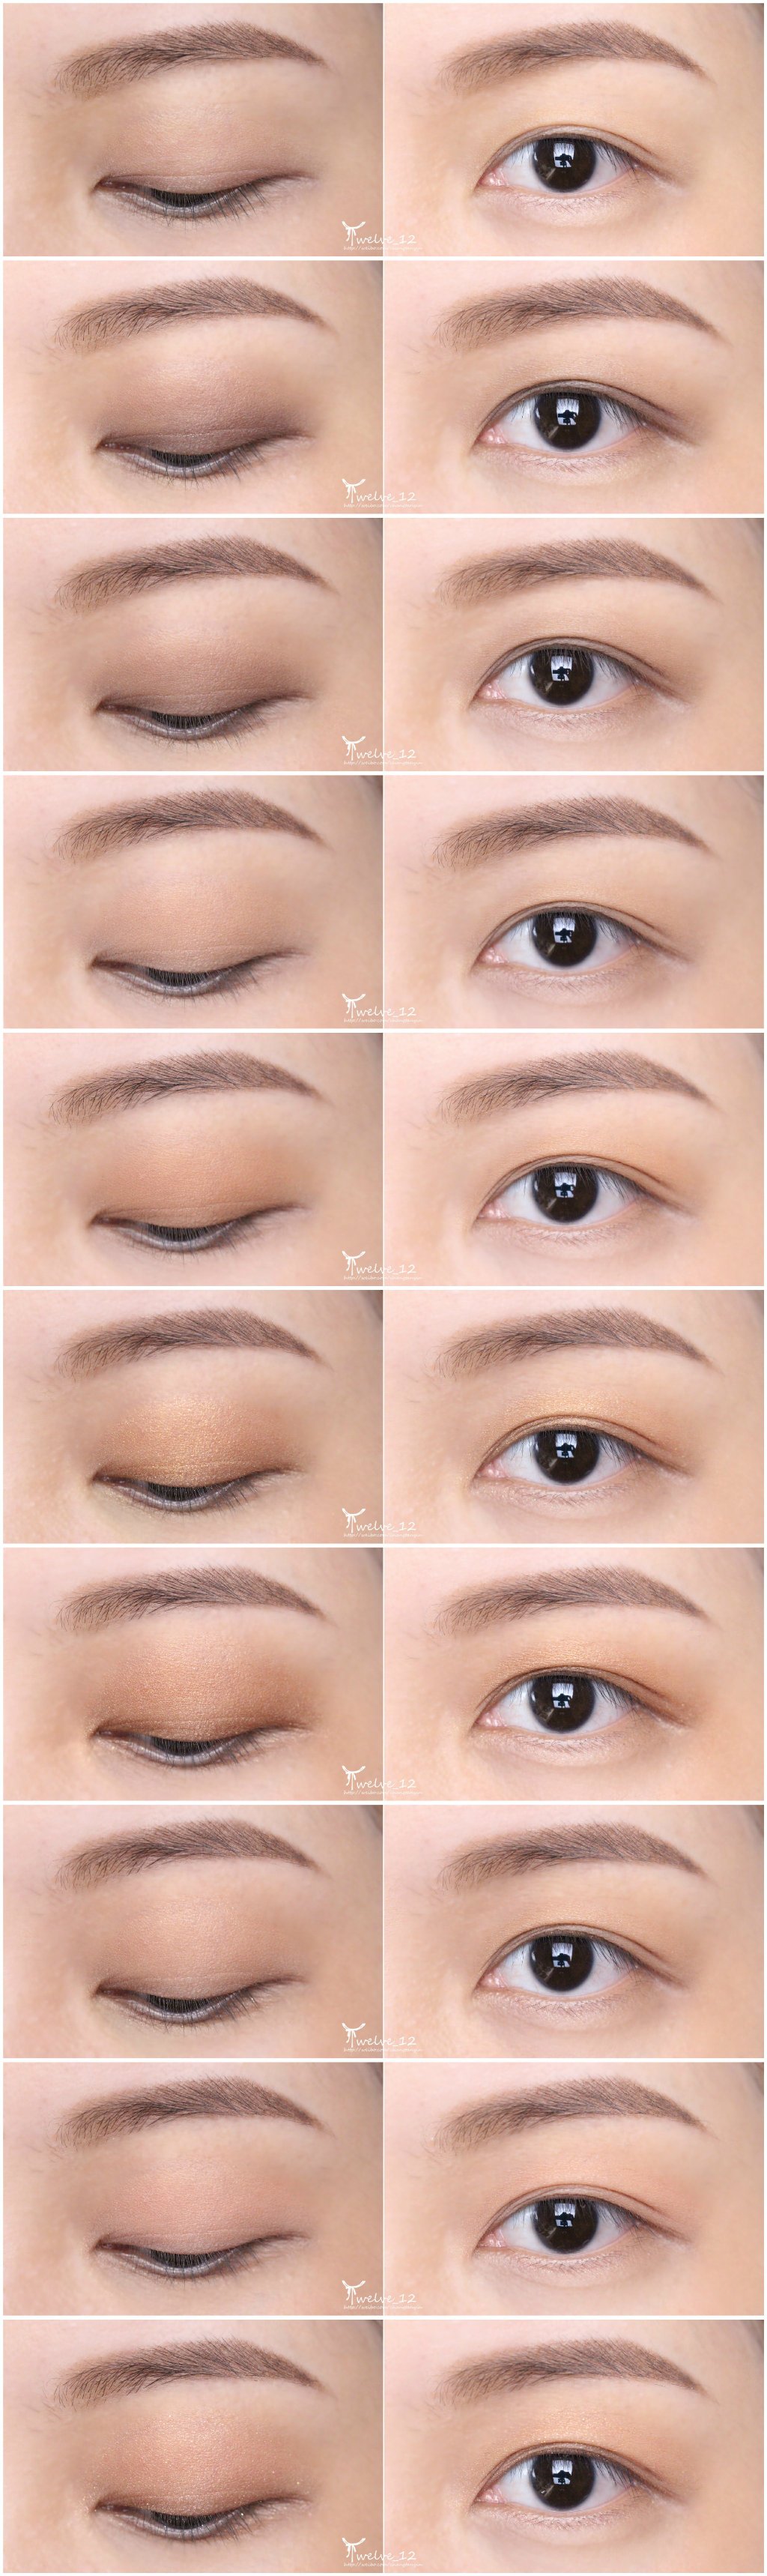 ETUDE HOUSE PLAY COLOR EYES in the cafe 爱丽小屋/伊蒂之屋十色眼影咖啡盘试色